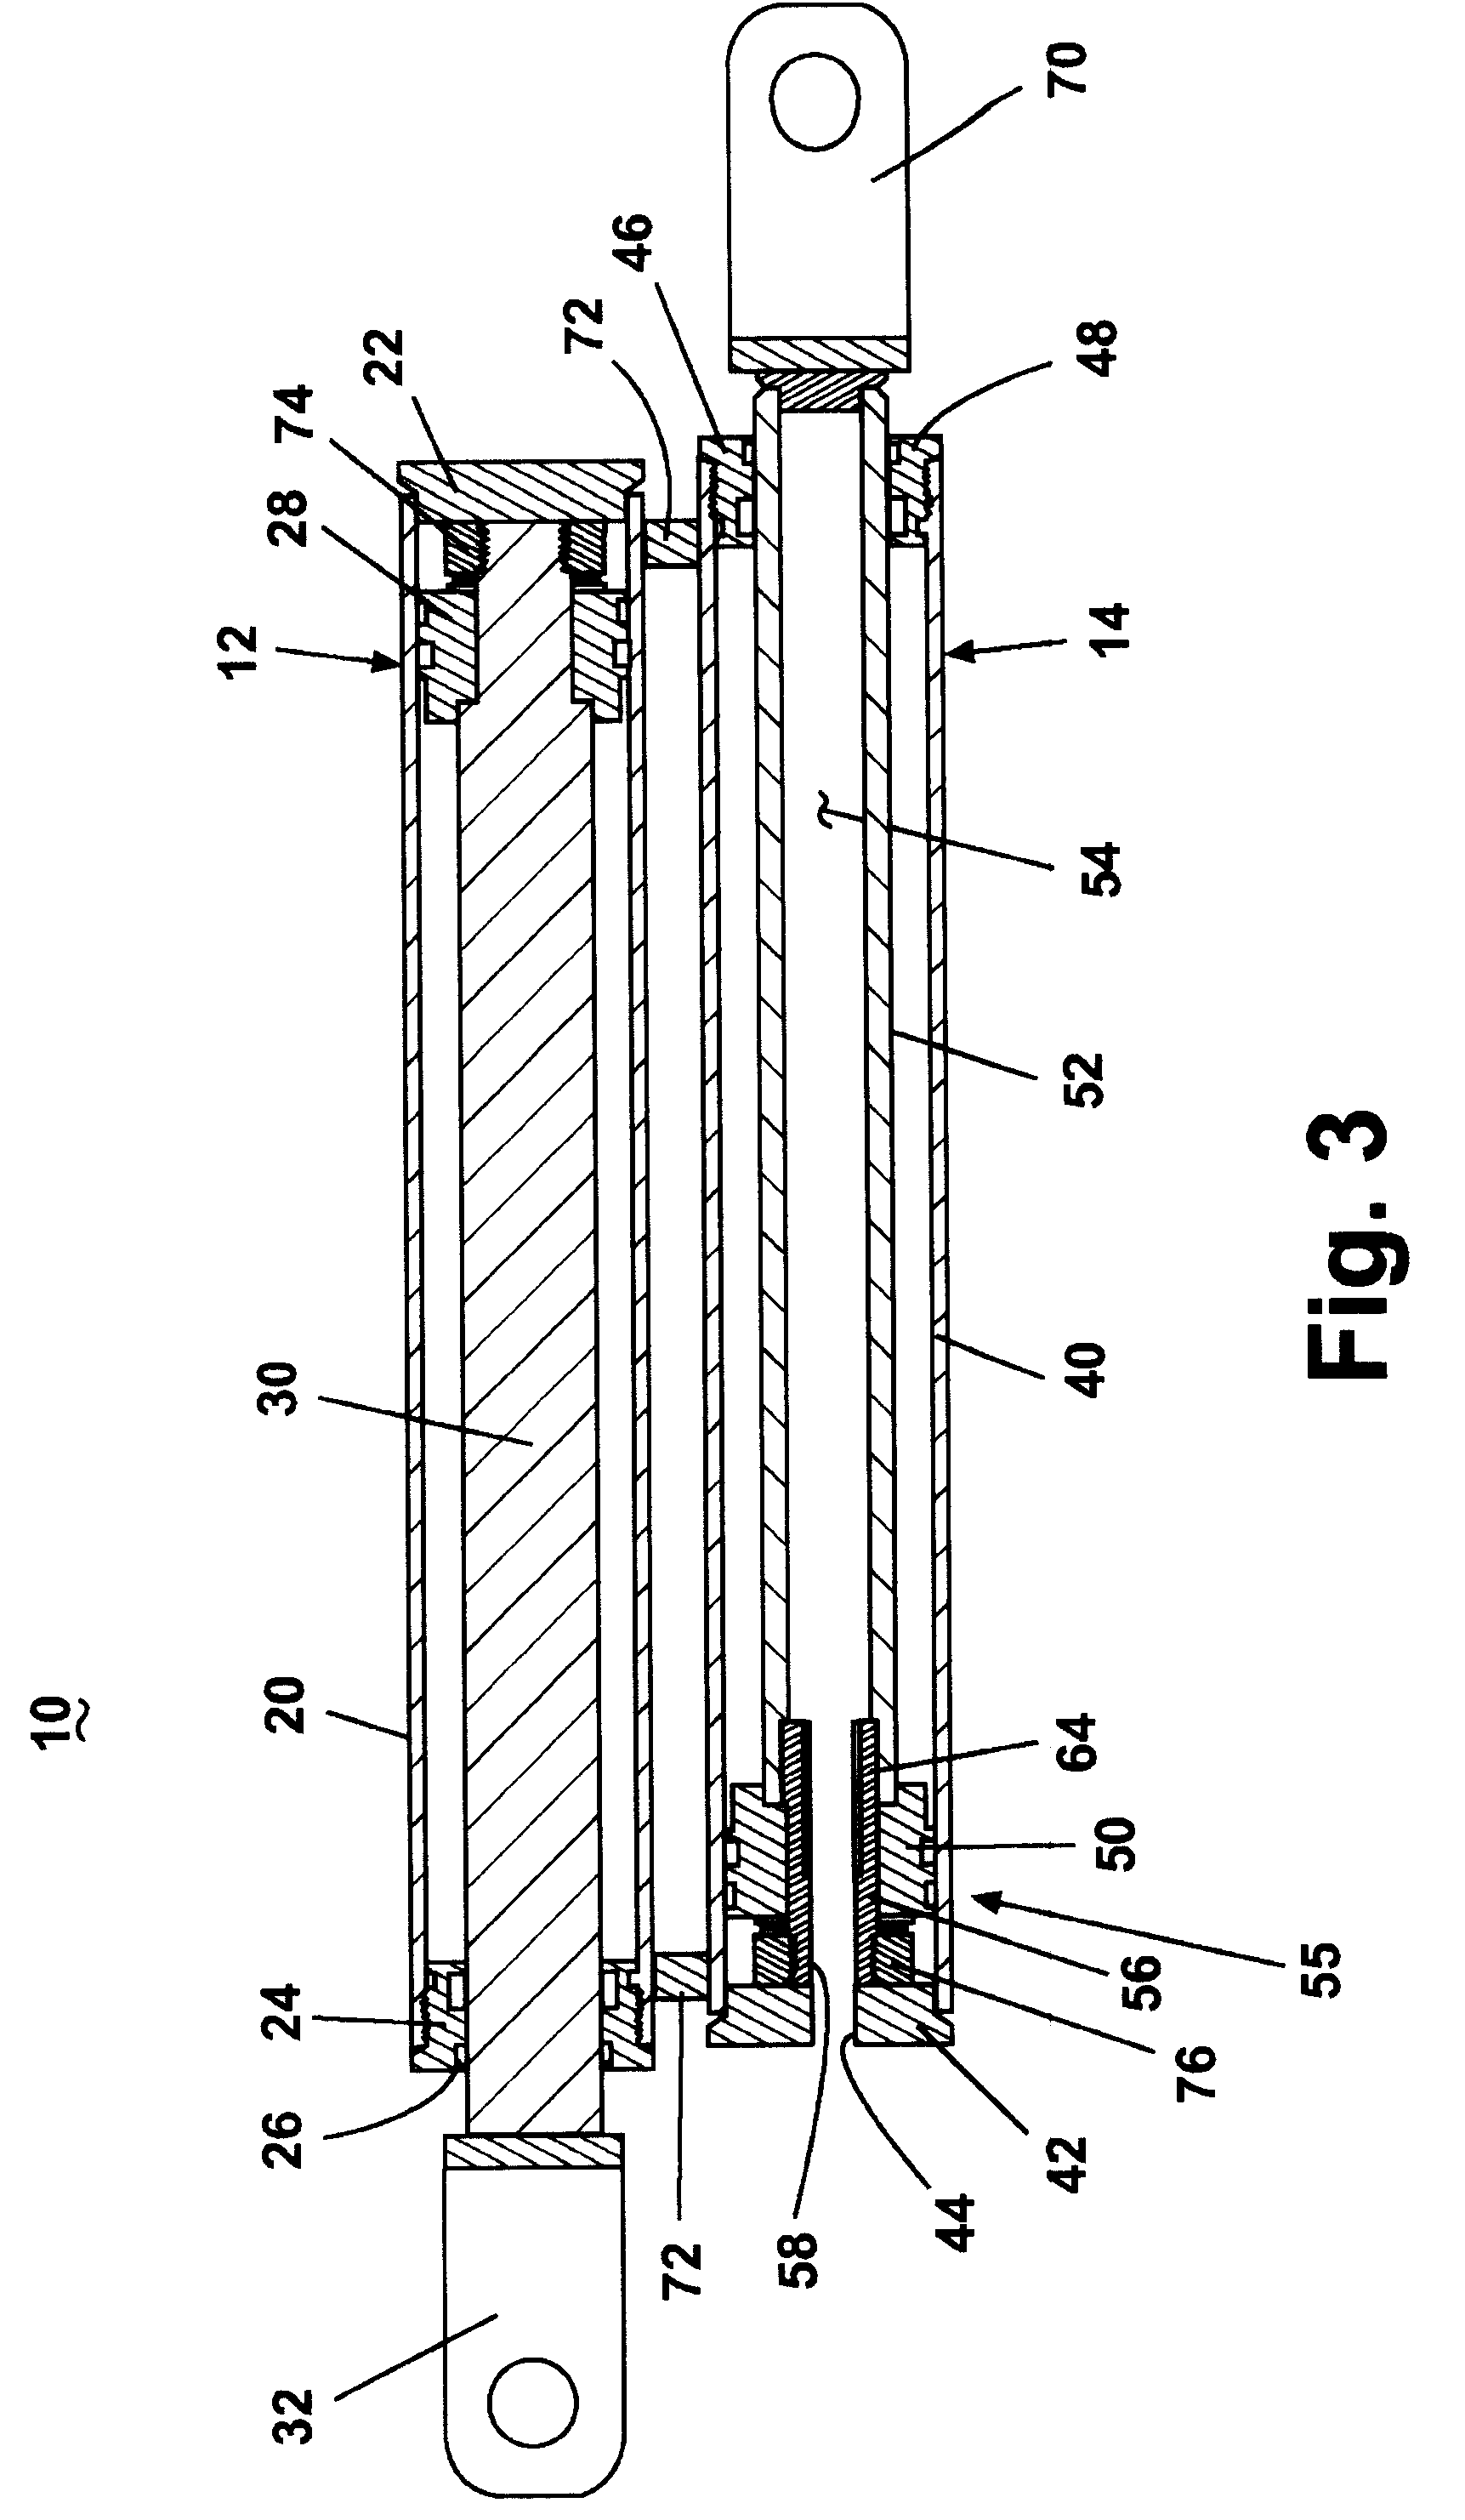 Hydraulic actuator assembly with rotation restraint